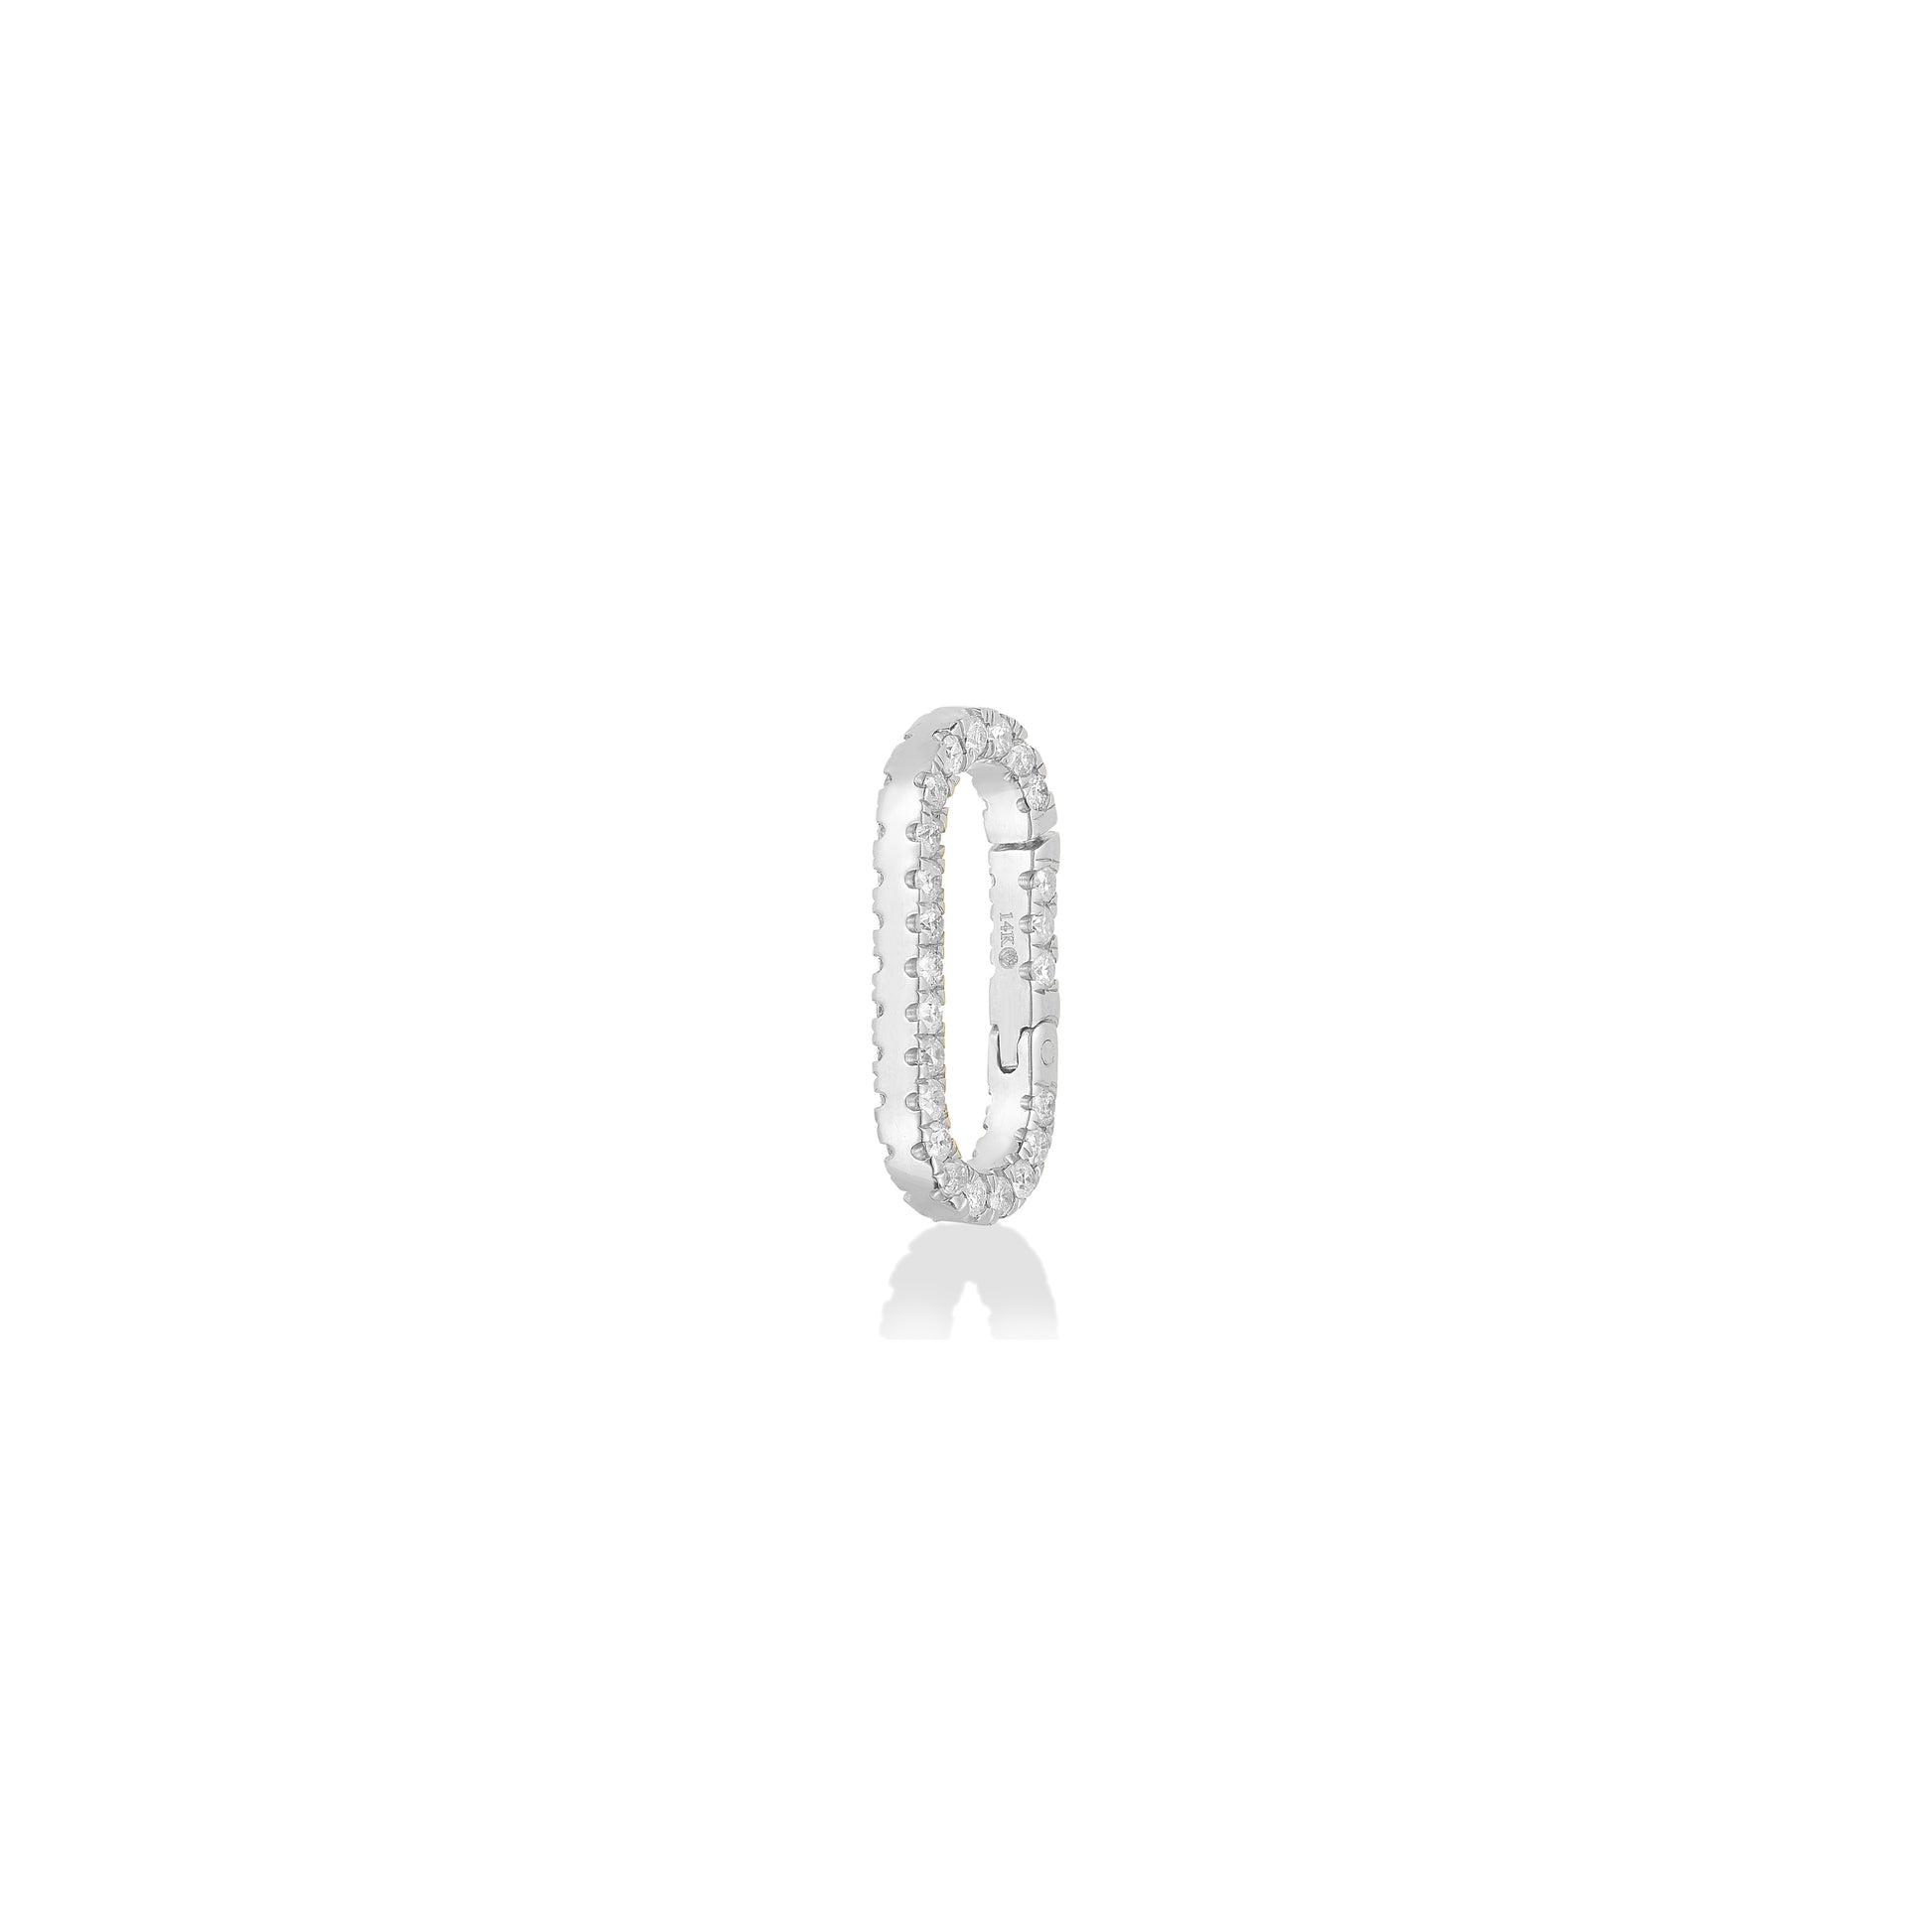 14k white gold oval locking charm with pave diamonds on facades.